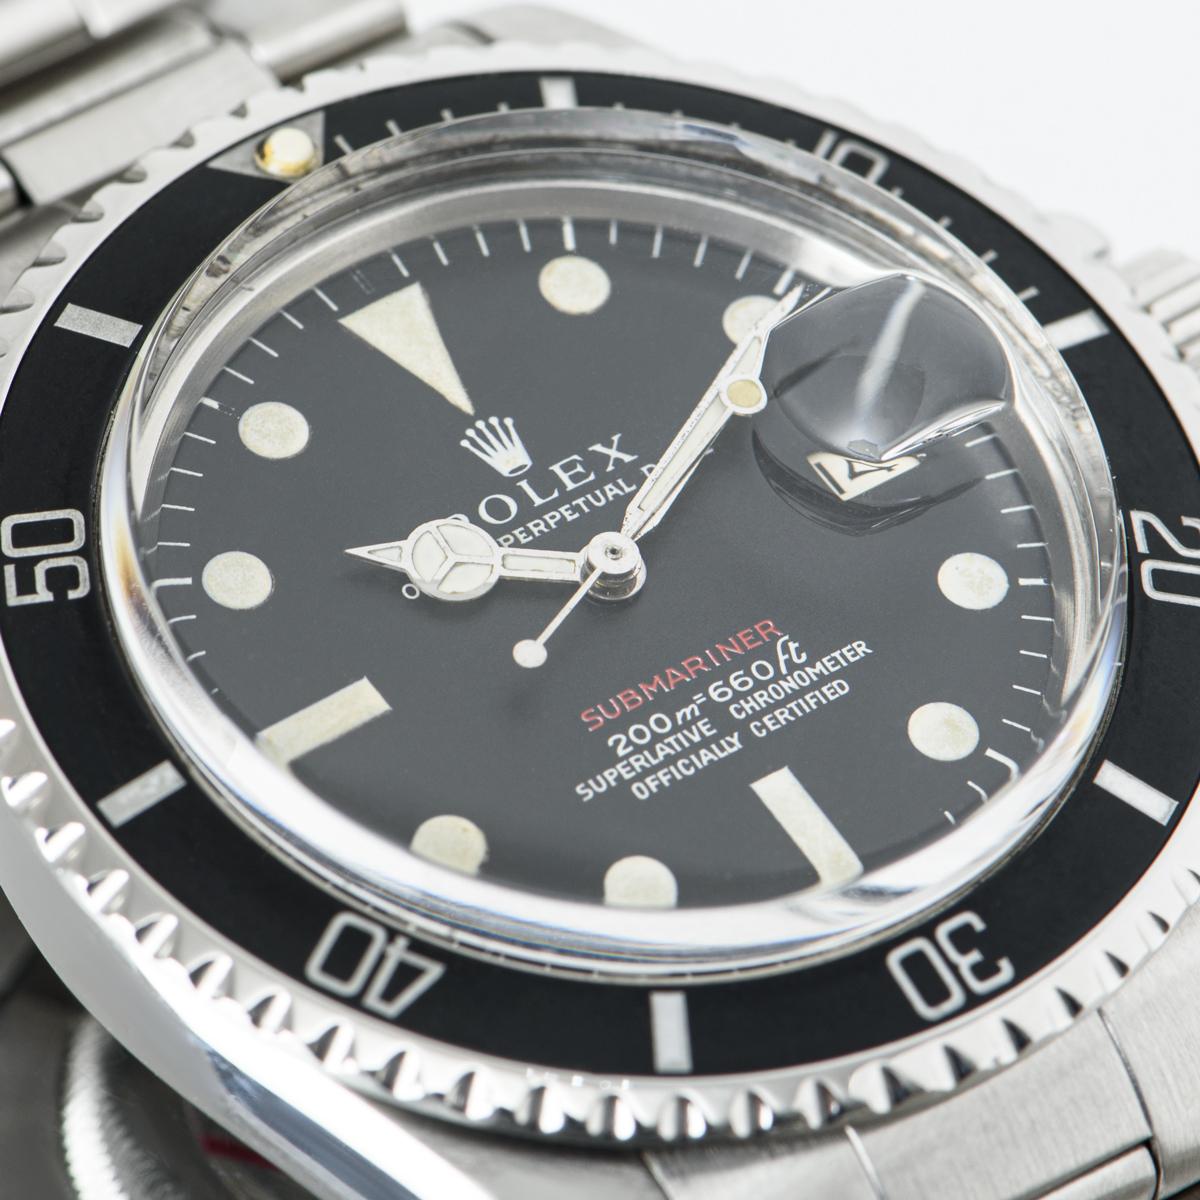 Rolex Submariner Rare Red Writing Meters First Mark I Dial 1680 For Sale 1